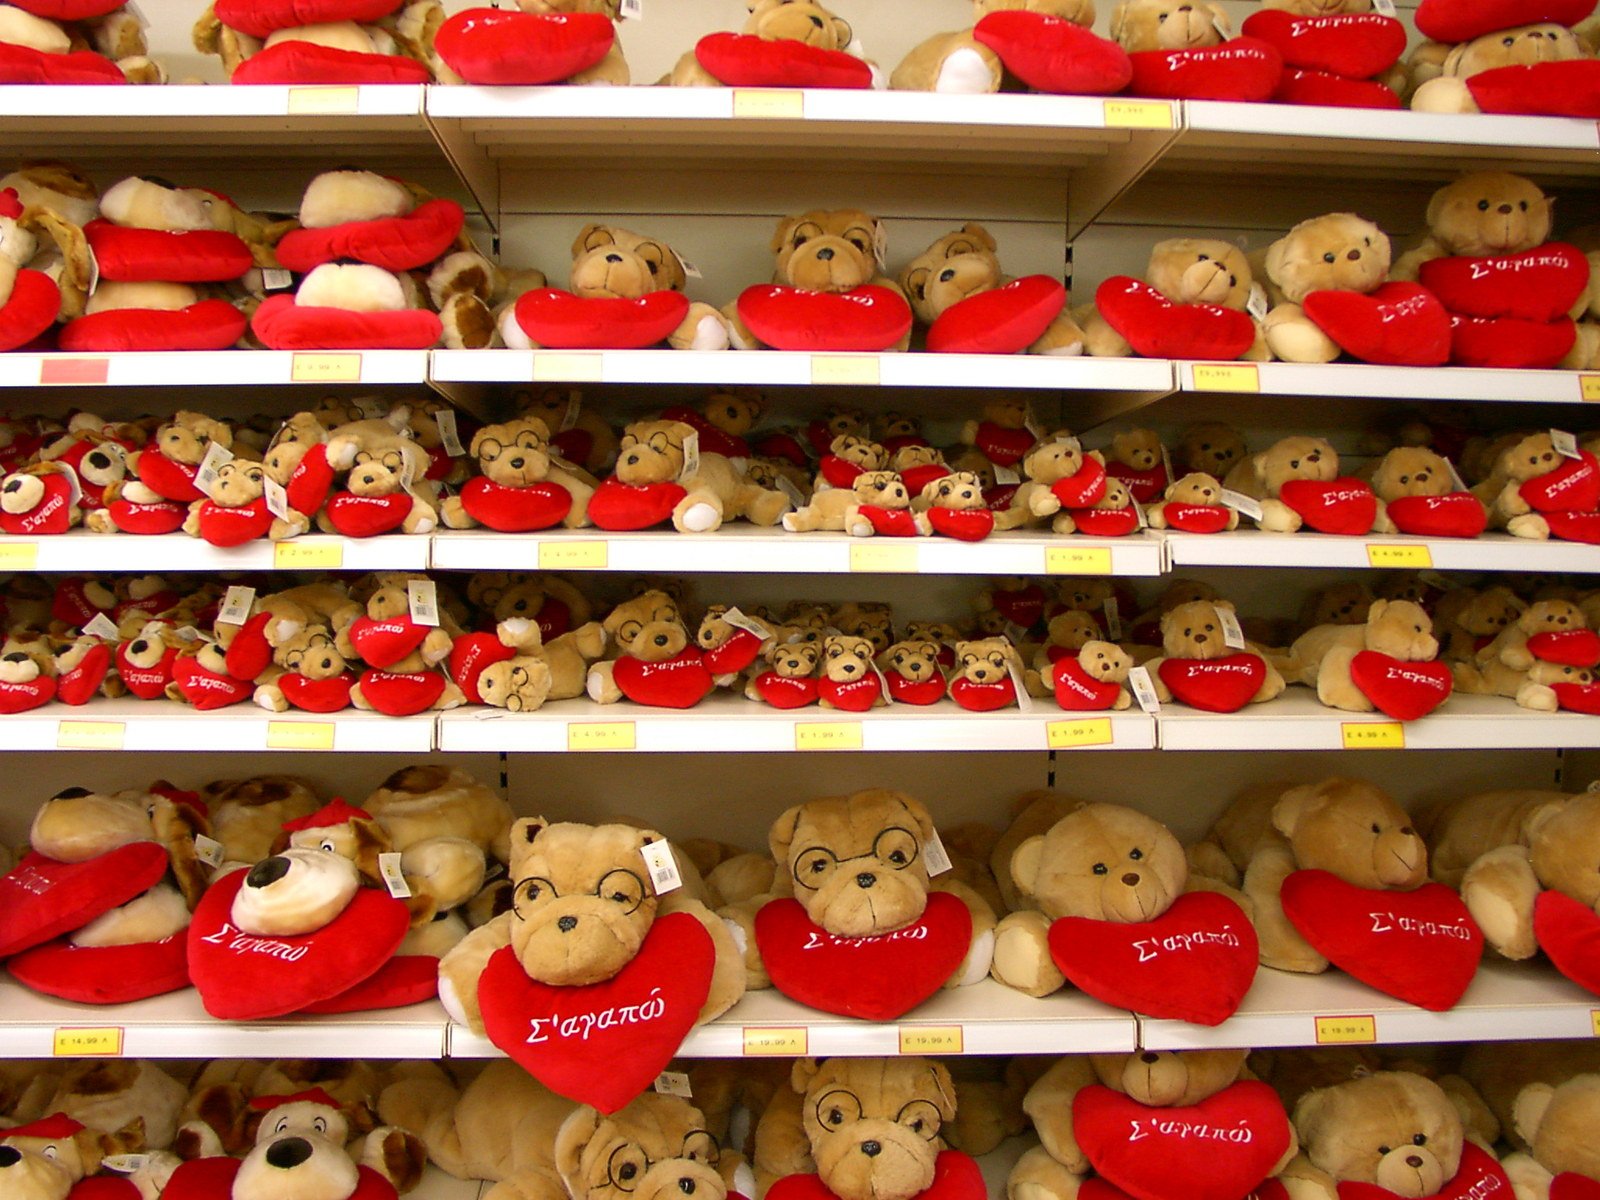 shelves filled with red and beige teddy bears